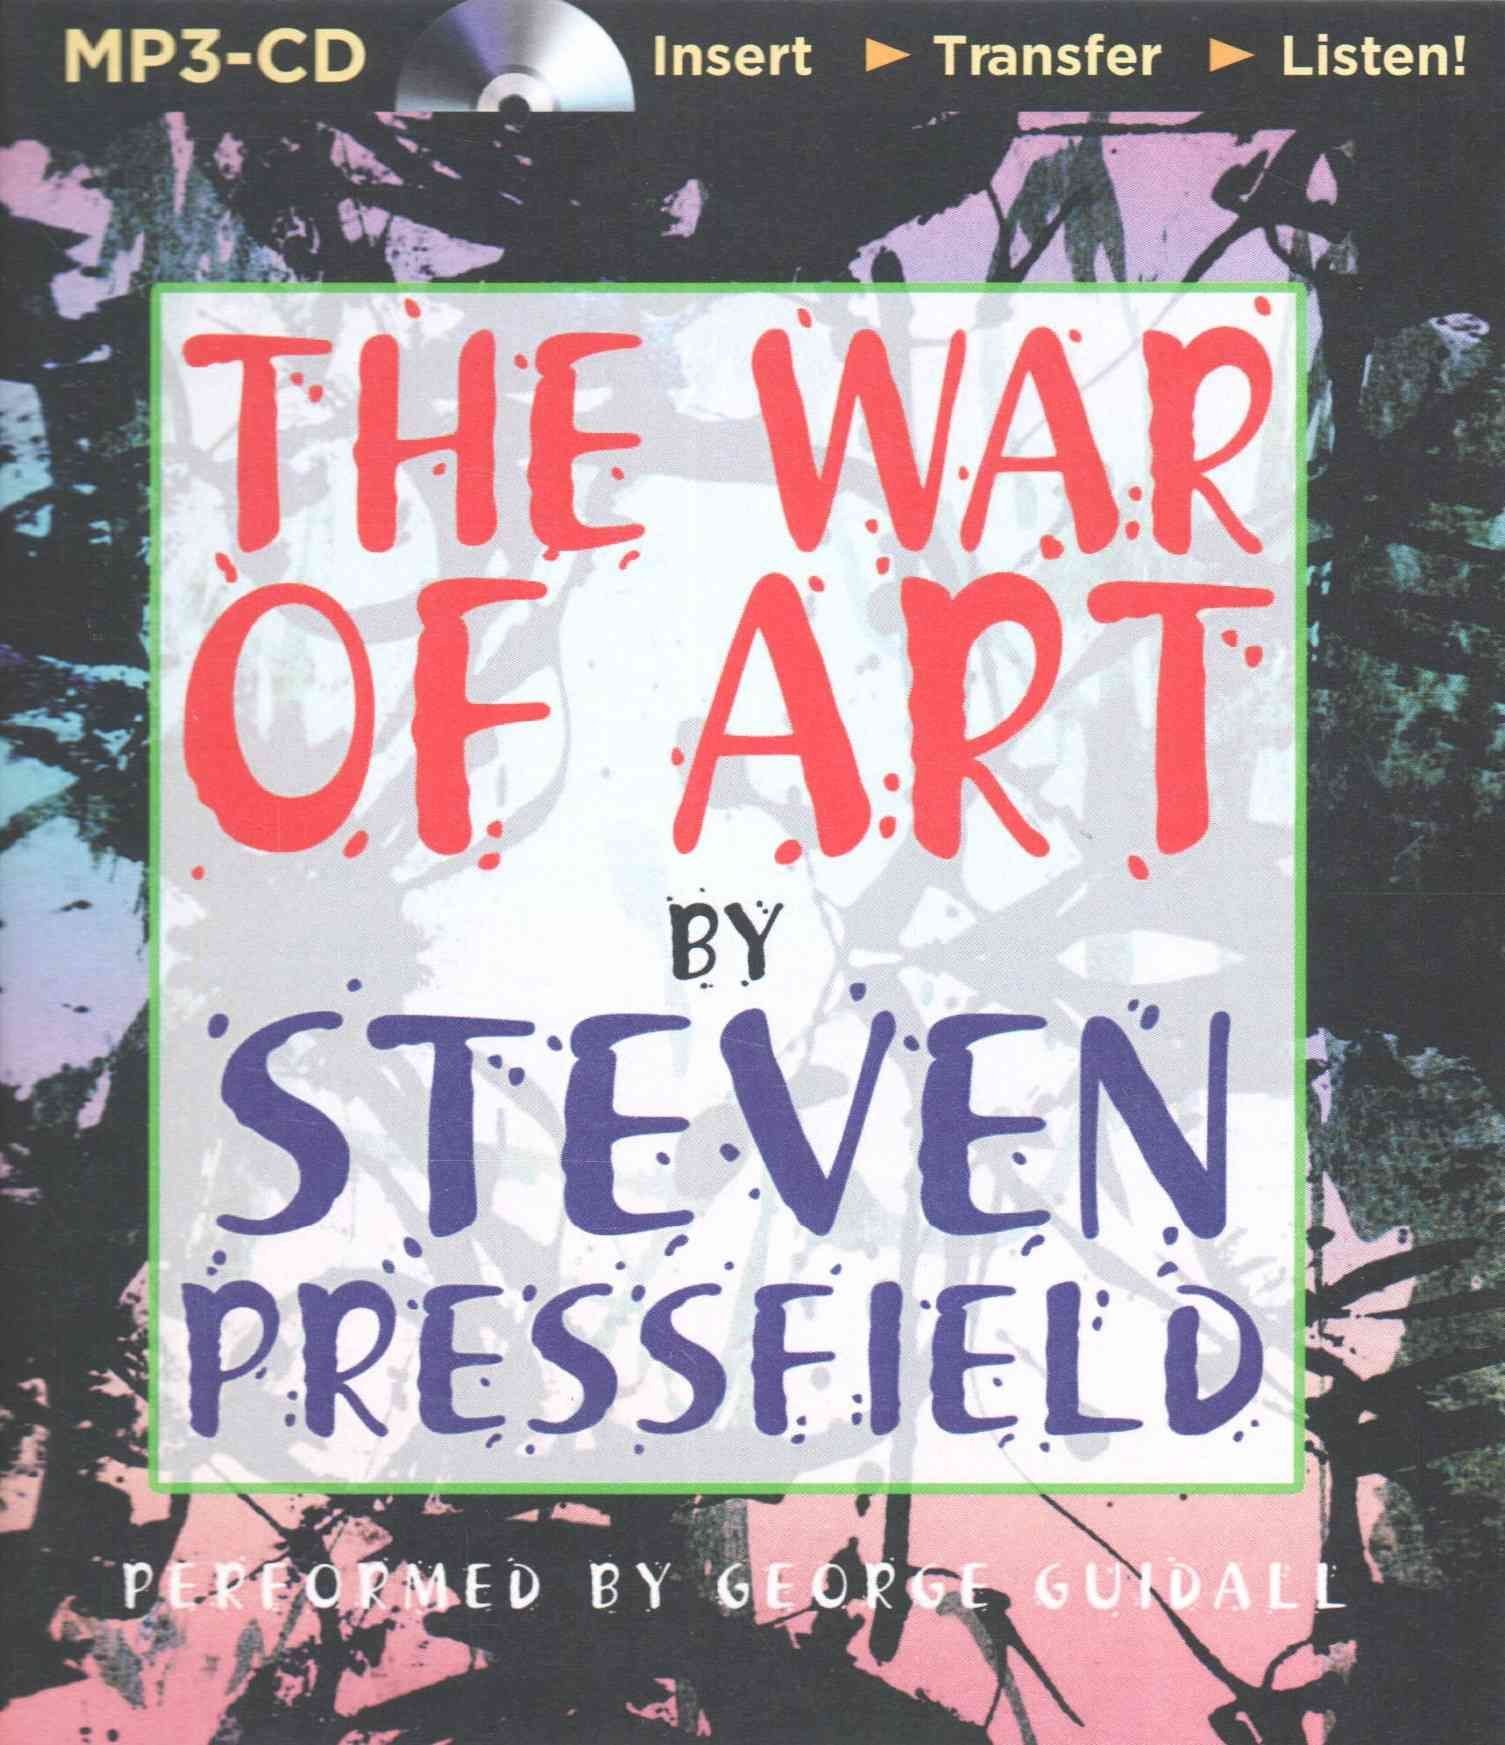 Steven Pressfield (Author of The War of Art)